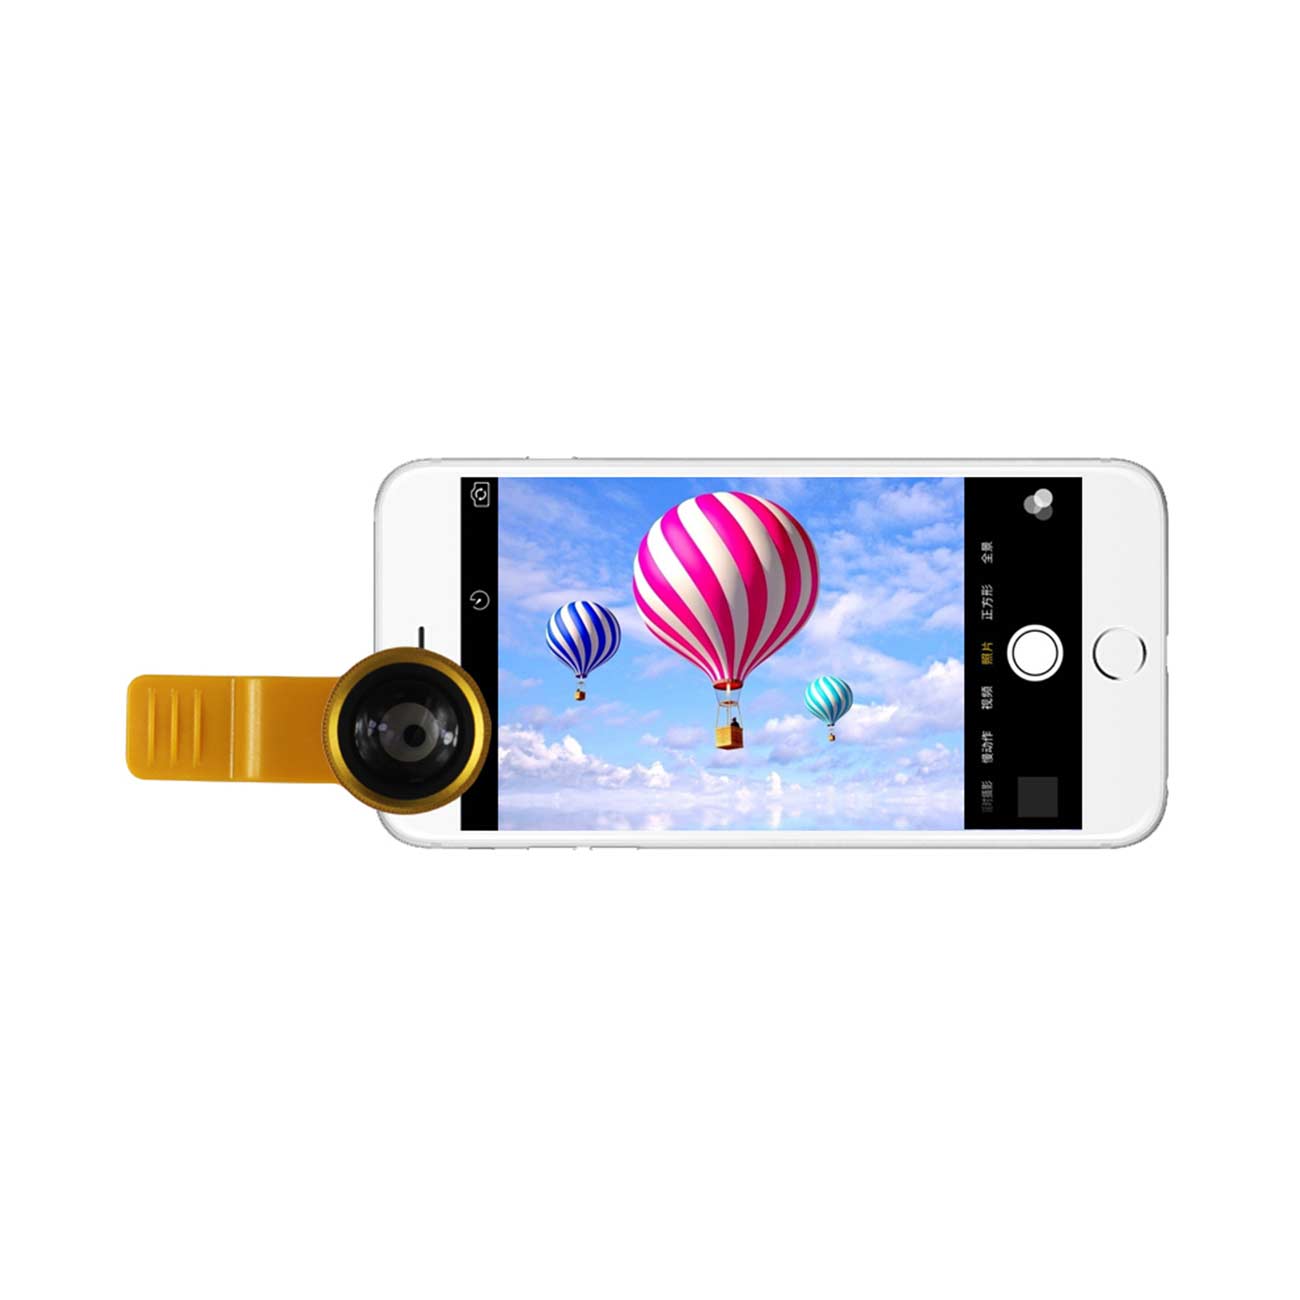 2X Teleconverter Lens Yellow For iPhones and Smartphones